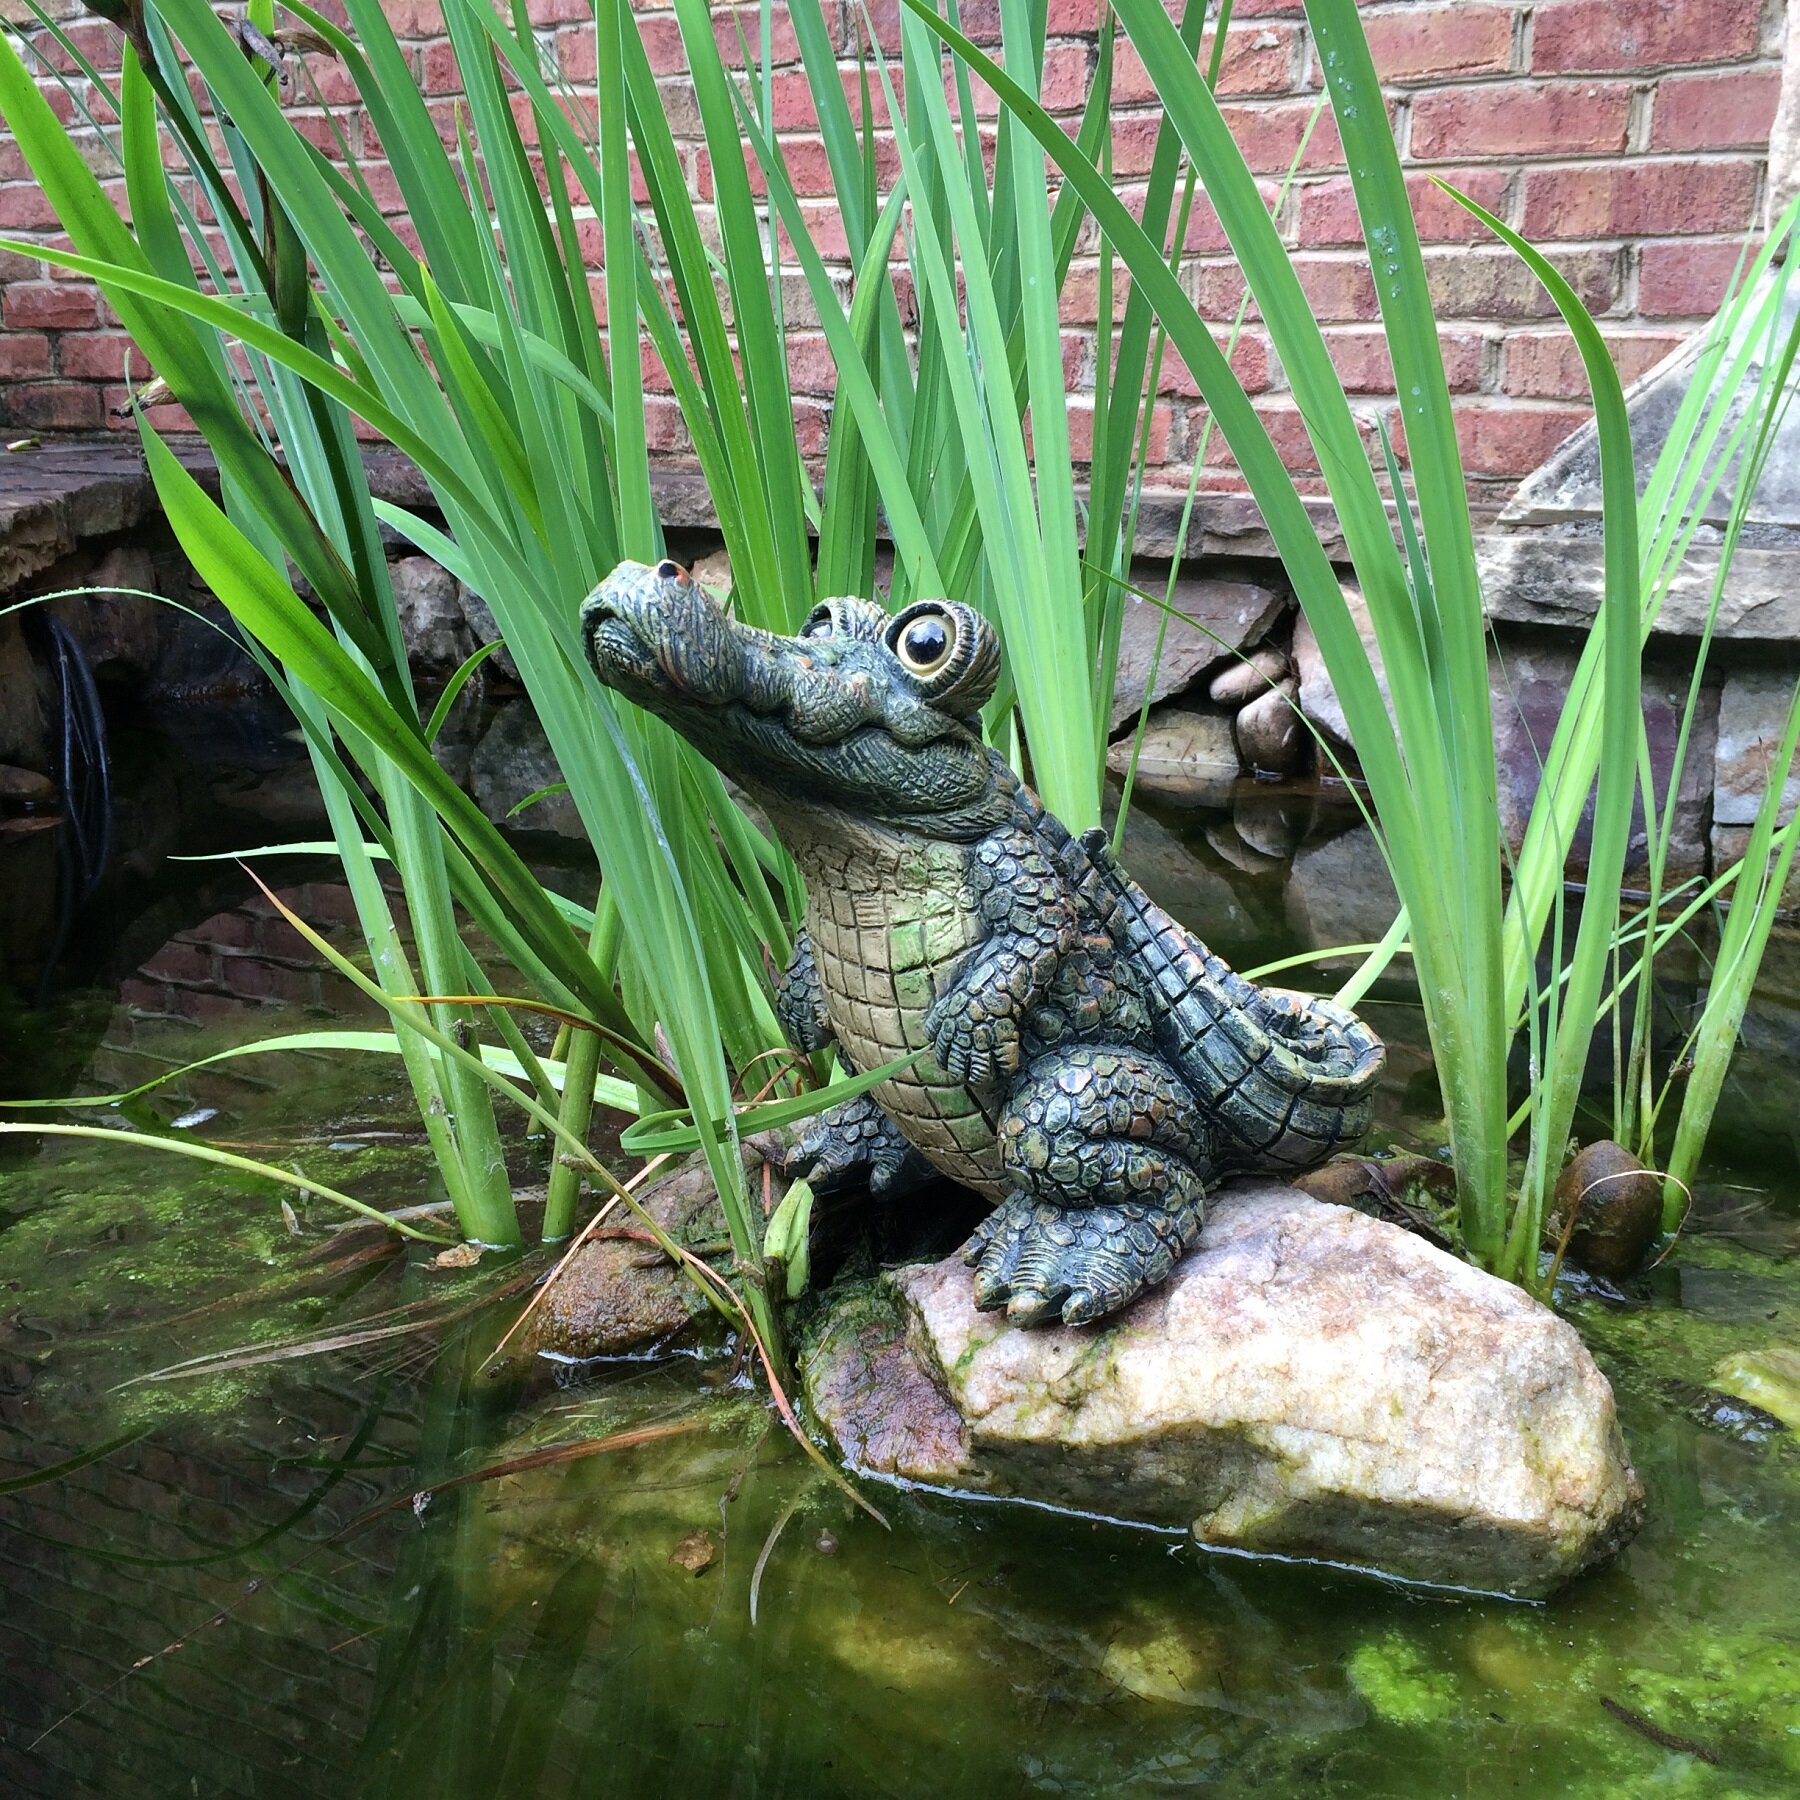 HomeStyles Whimsical Standing Gator the Alligator Garden Statue & Reviews